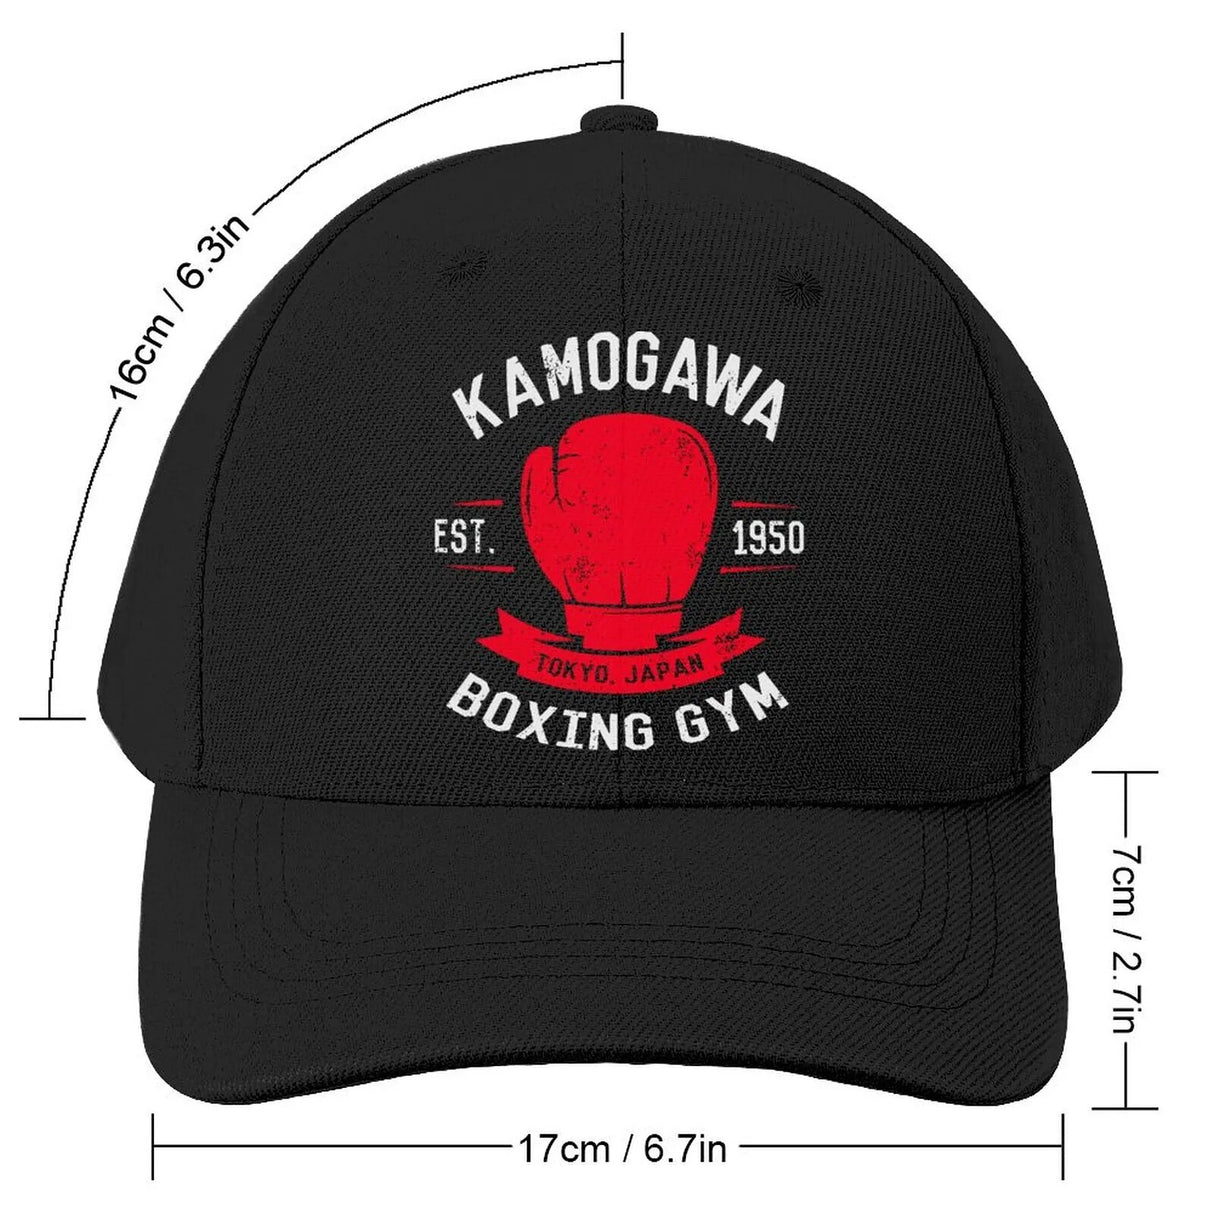 It's more than just a cap it's a symbol of your emblem of your inner fighter| If you are looking for more Hajime No Ippo Merch, We have it all! | Check out all our Anime Merch now!